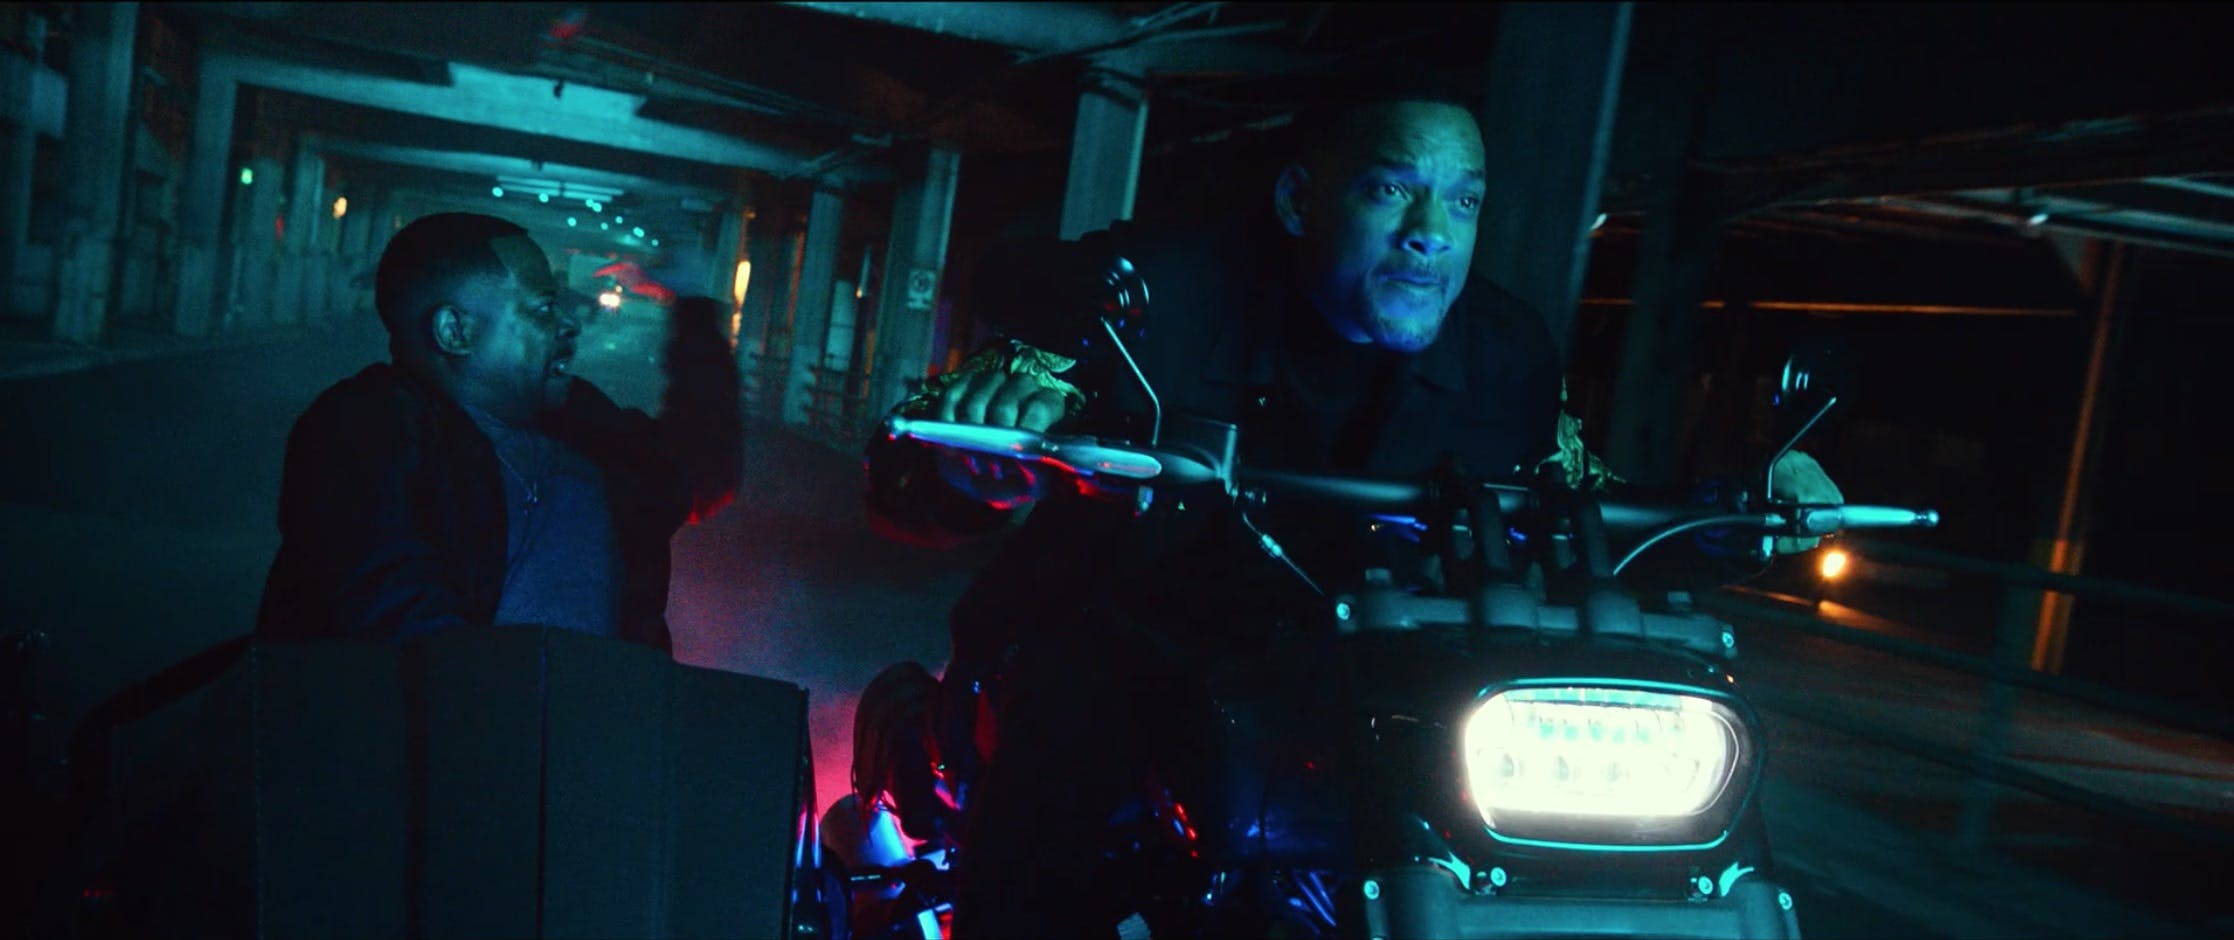 Bad Boys For Life will smith driving motorcycle dynamic action